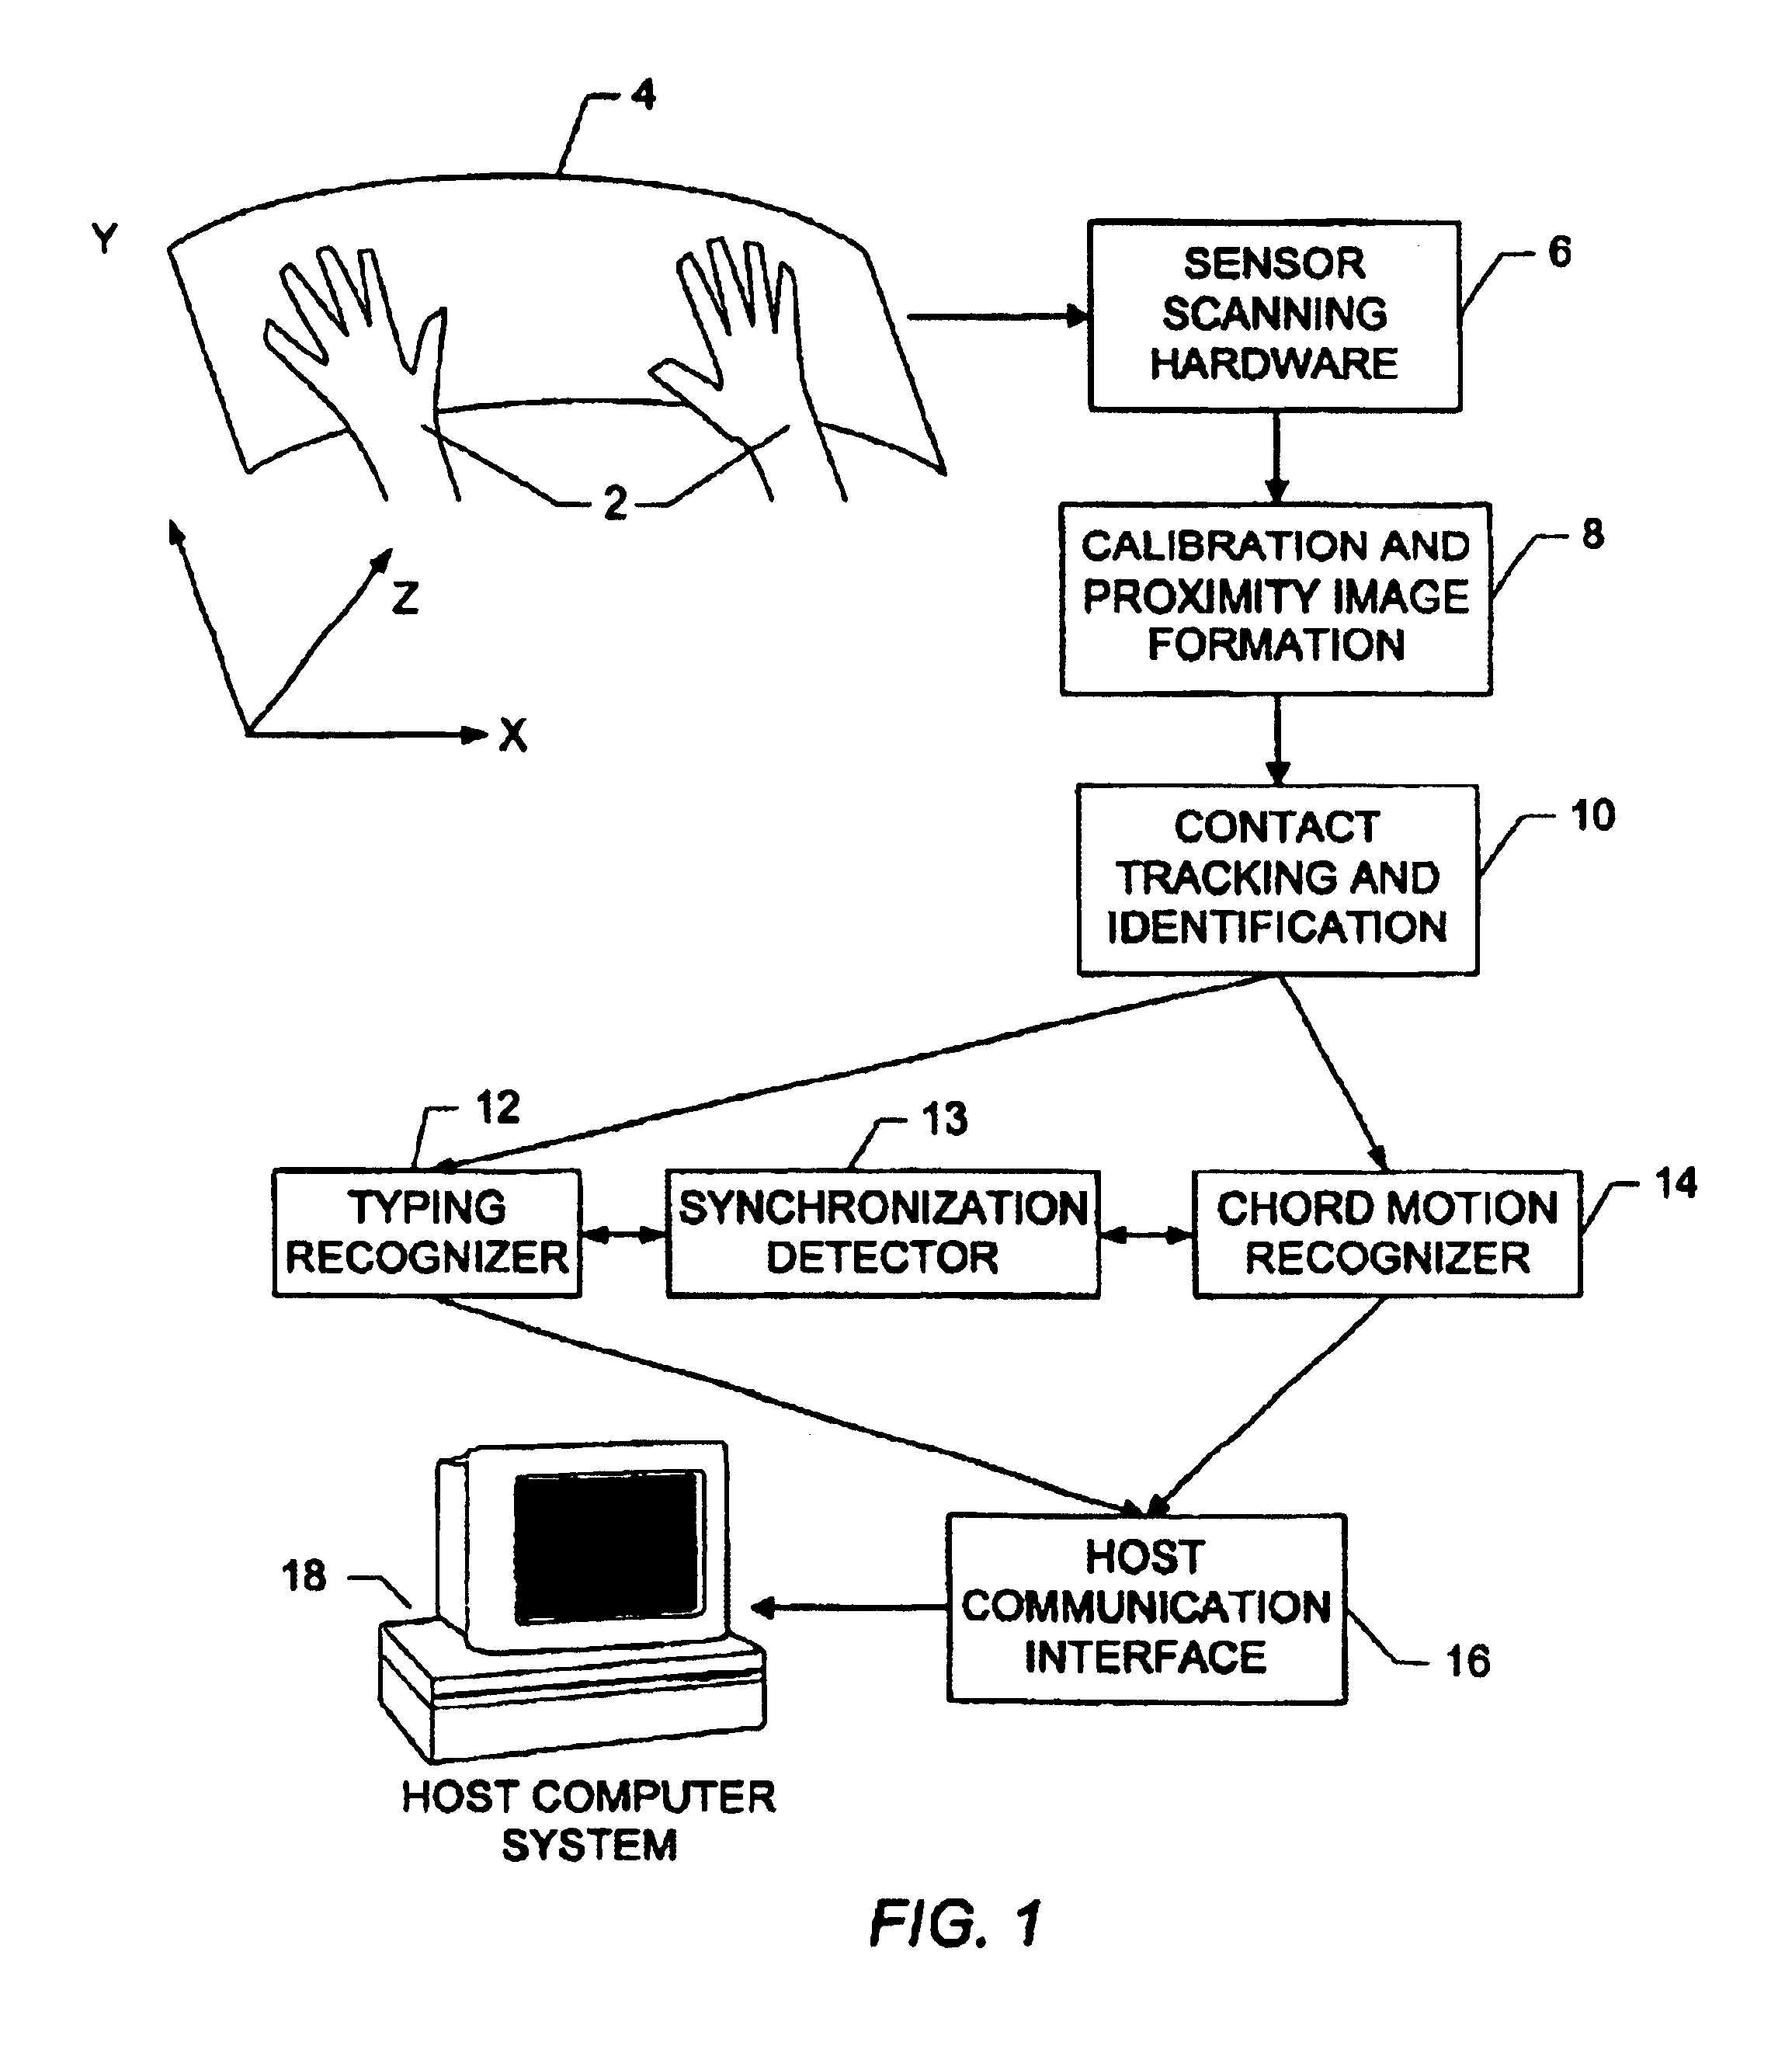 System and method for recognizing touch typing under limited tactile feedback conditions